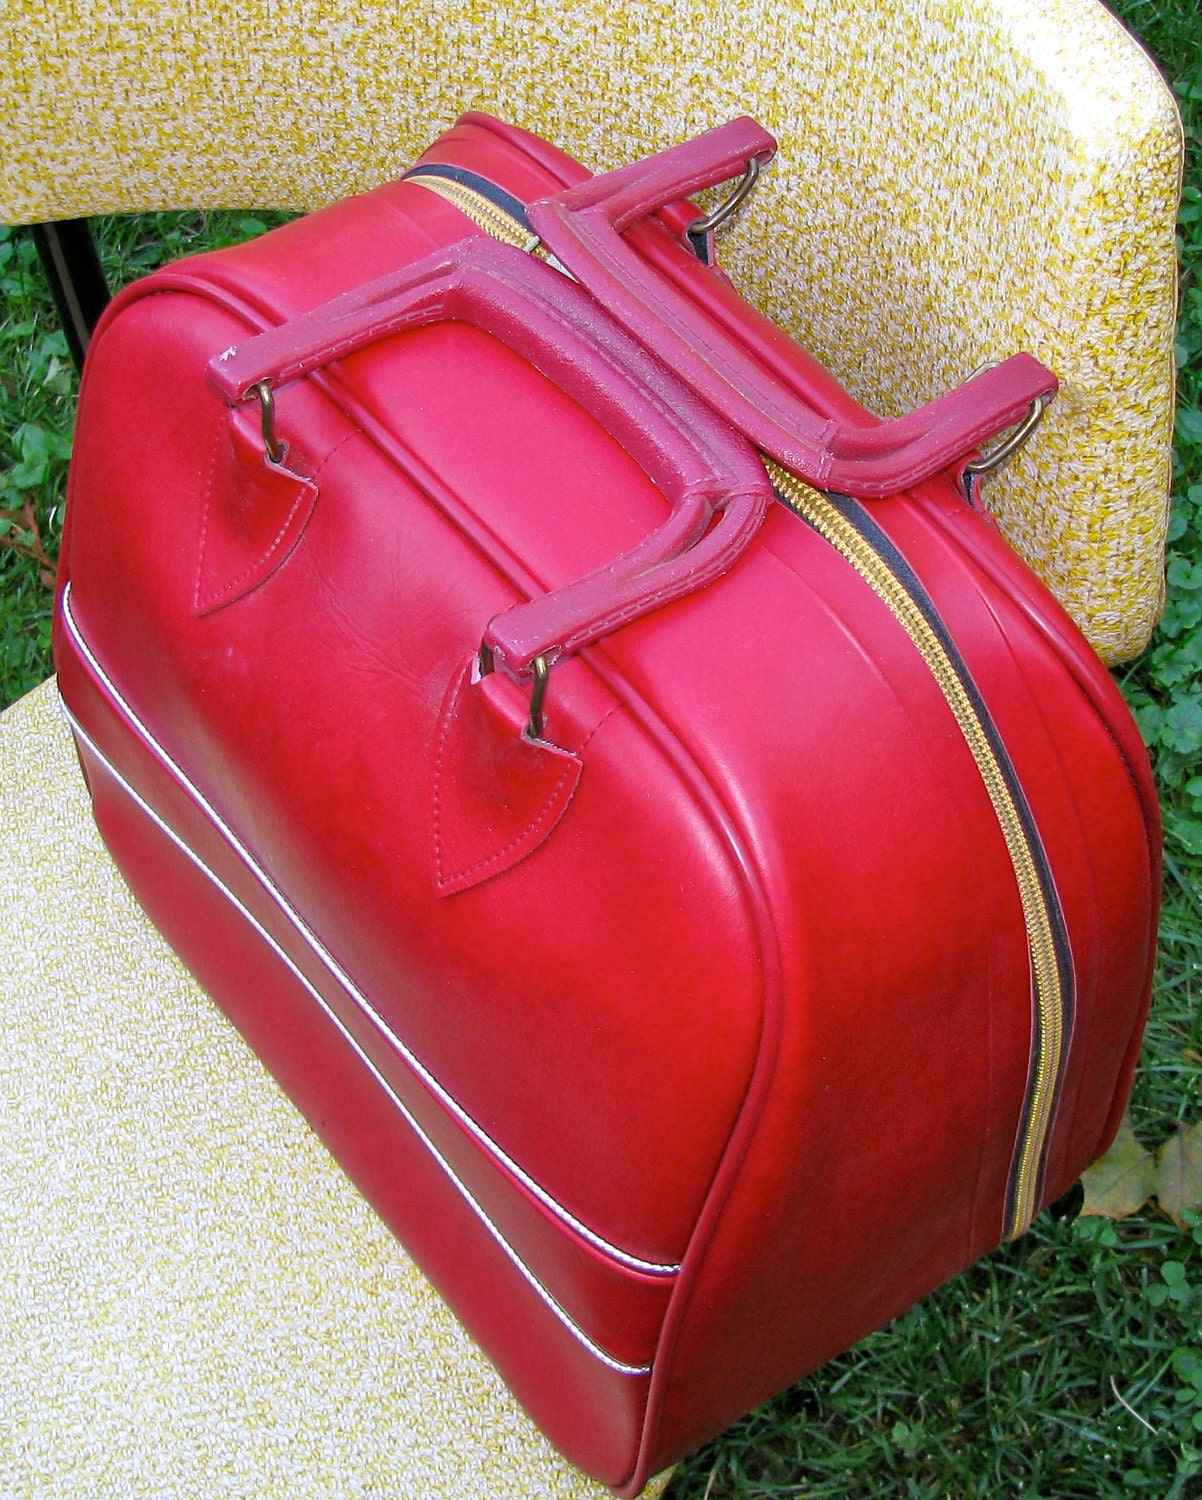 vintage bowling bag - classic red